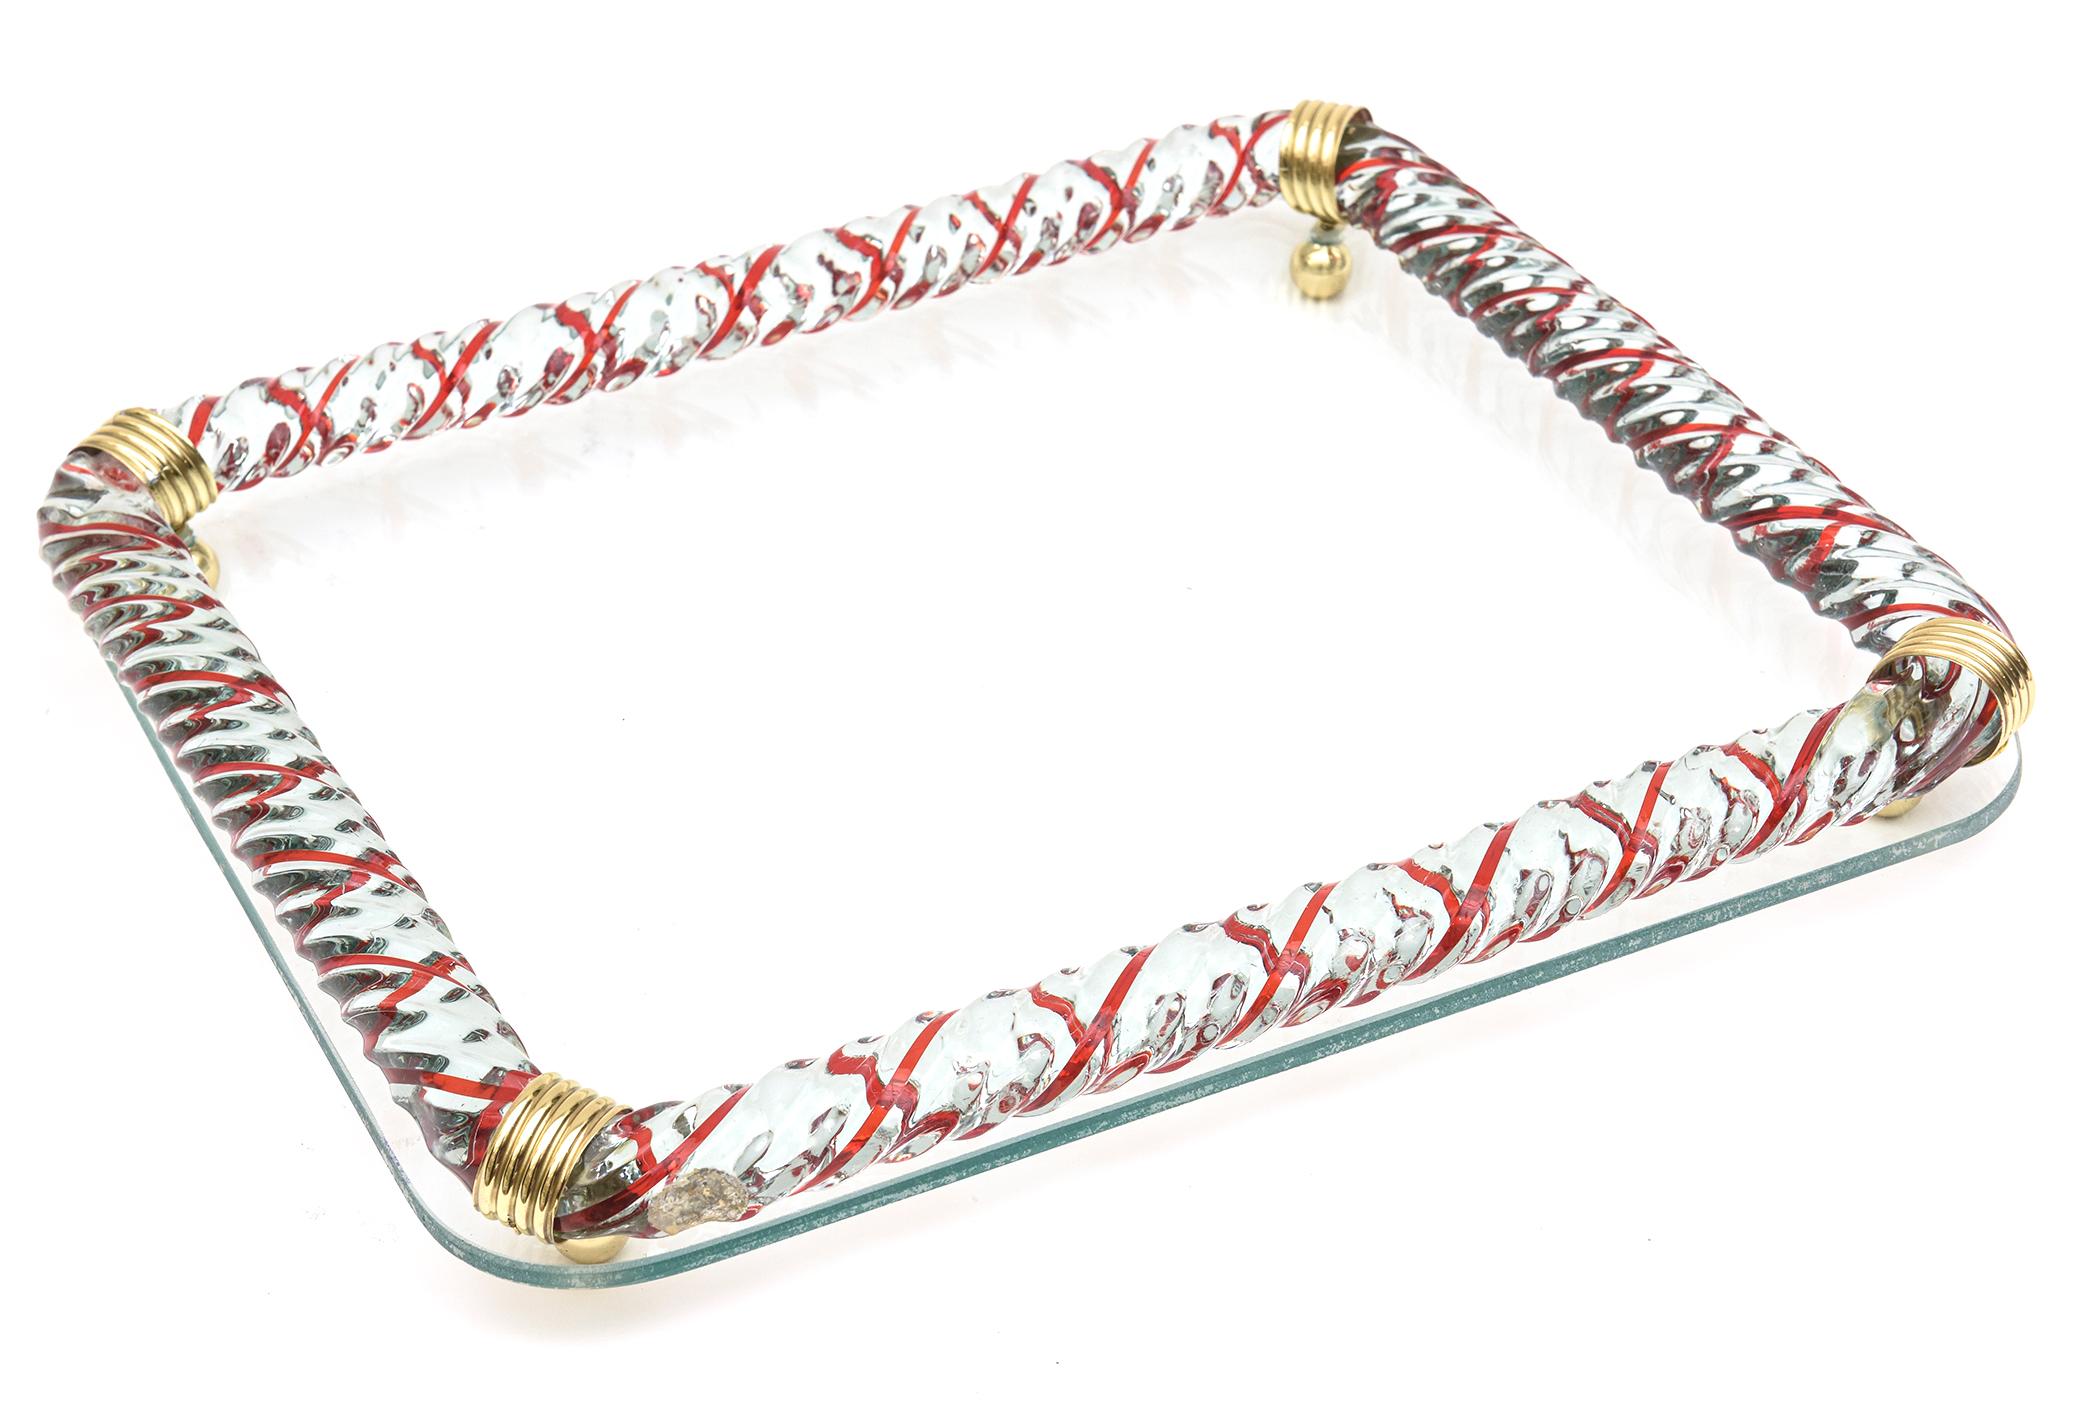 This gorgeous hand blown Italian Murano vintage glass tray by Venini is mid century modern. The red X style forms are randomly placed amidst the twisted clear rope glass. The tray is mirrored and the thickness of the roped twisted glass is 1.5